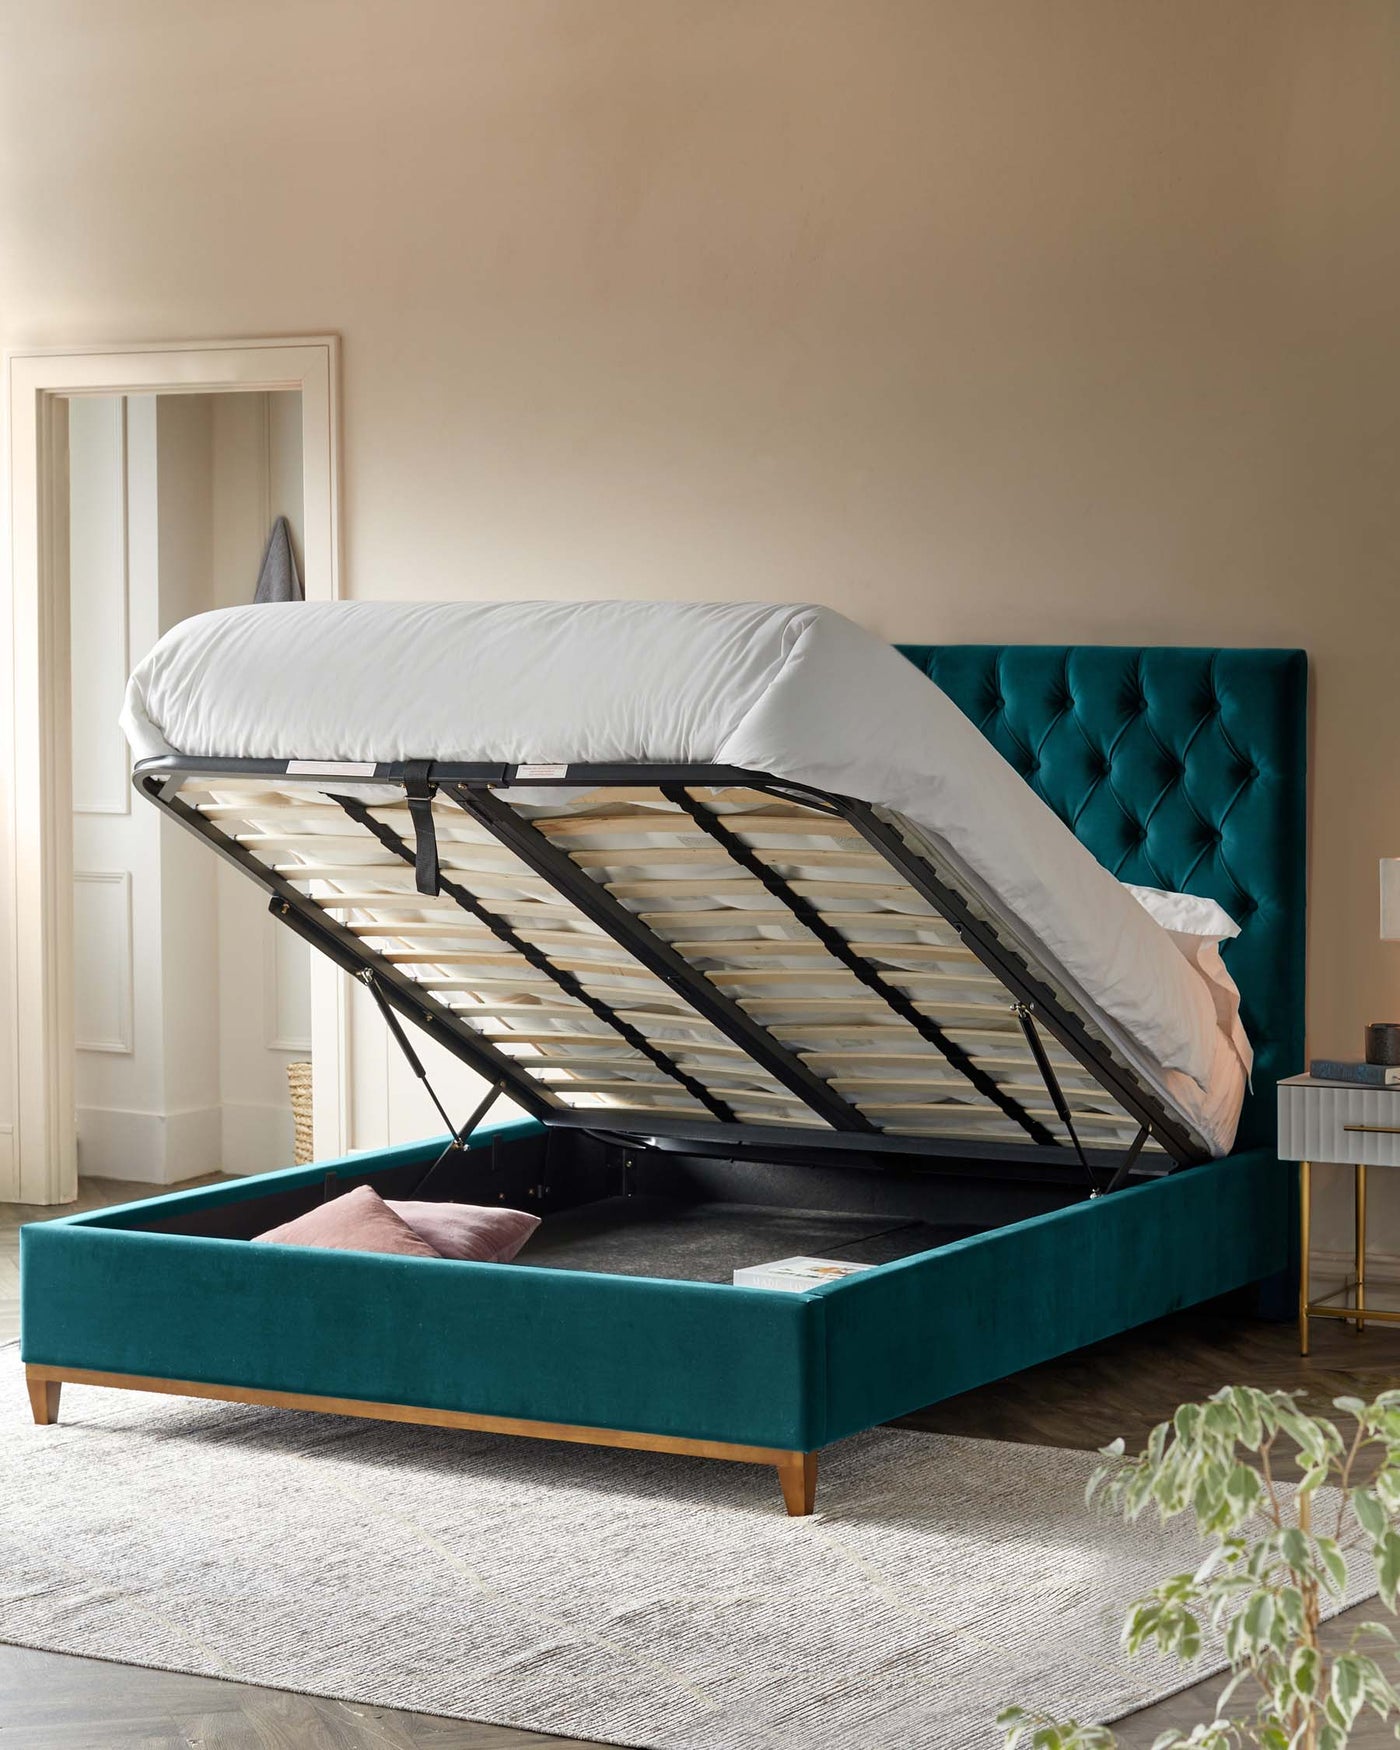 Elegant teal upholstered storage bed with a tufted headboard, raised mattress platform revealing a spacious storage compartment, set upon tapered wooden legs.